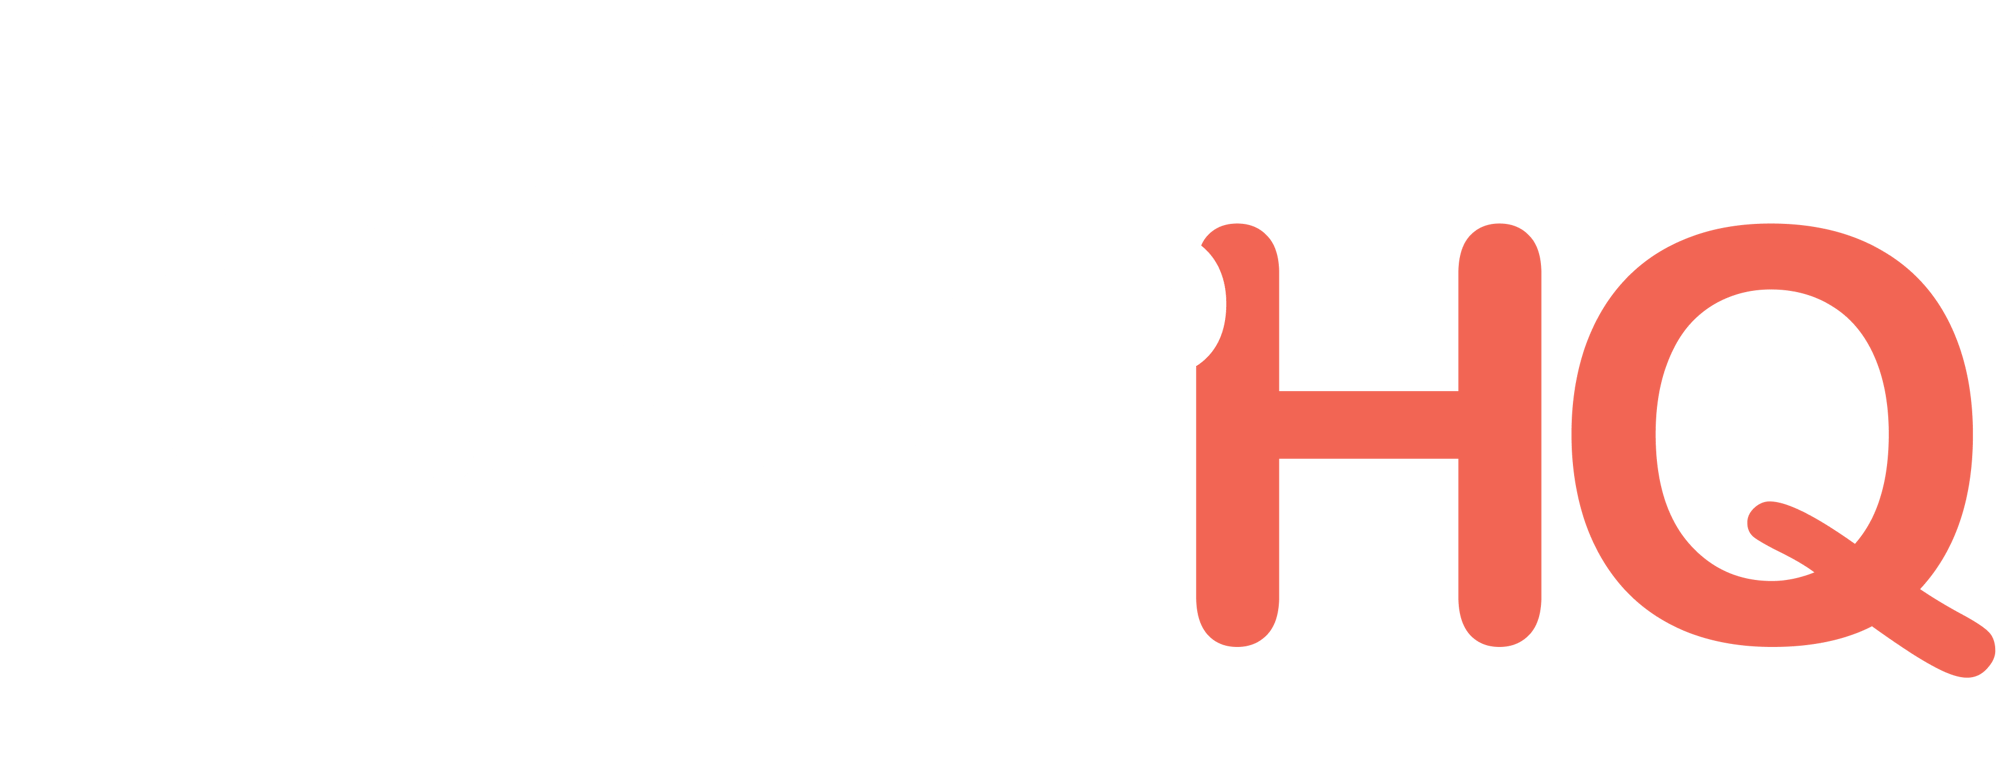 Your RAMMP HQ